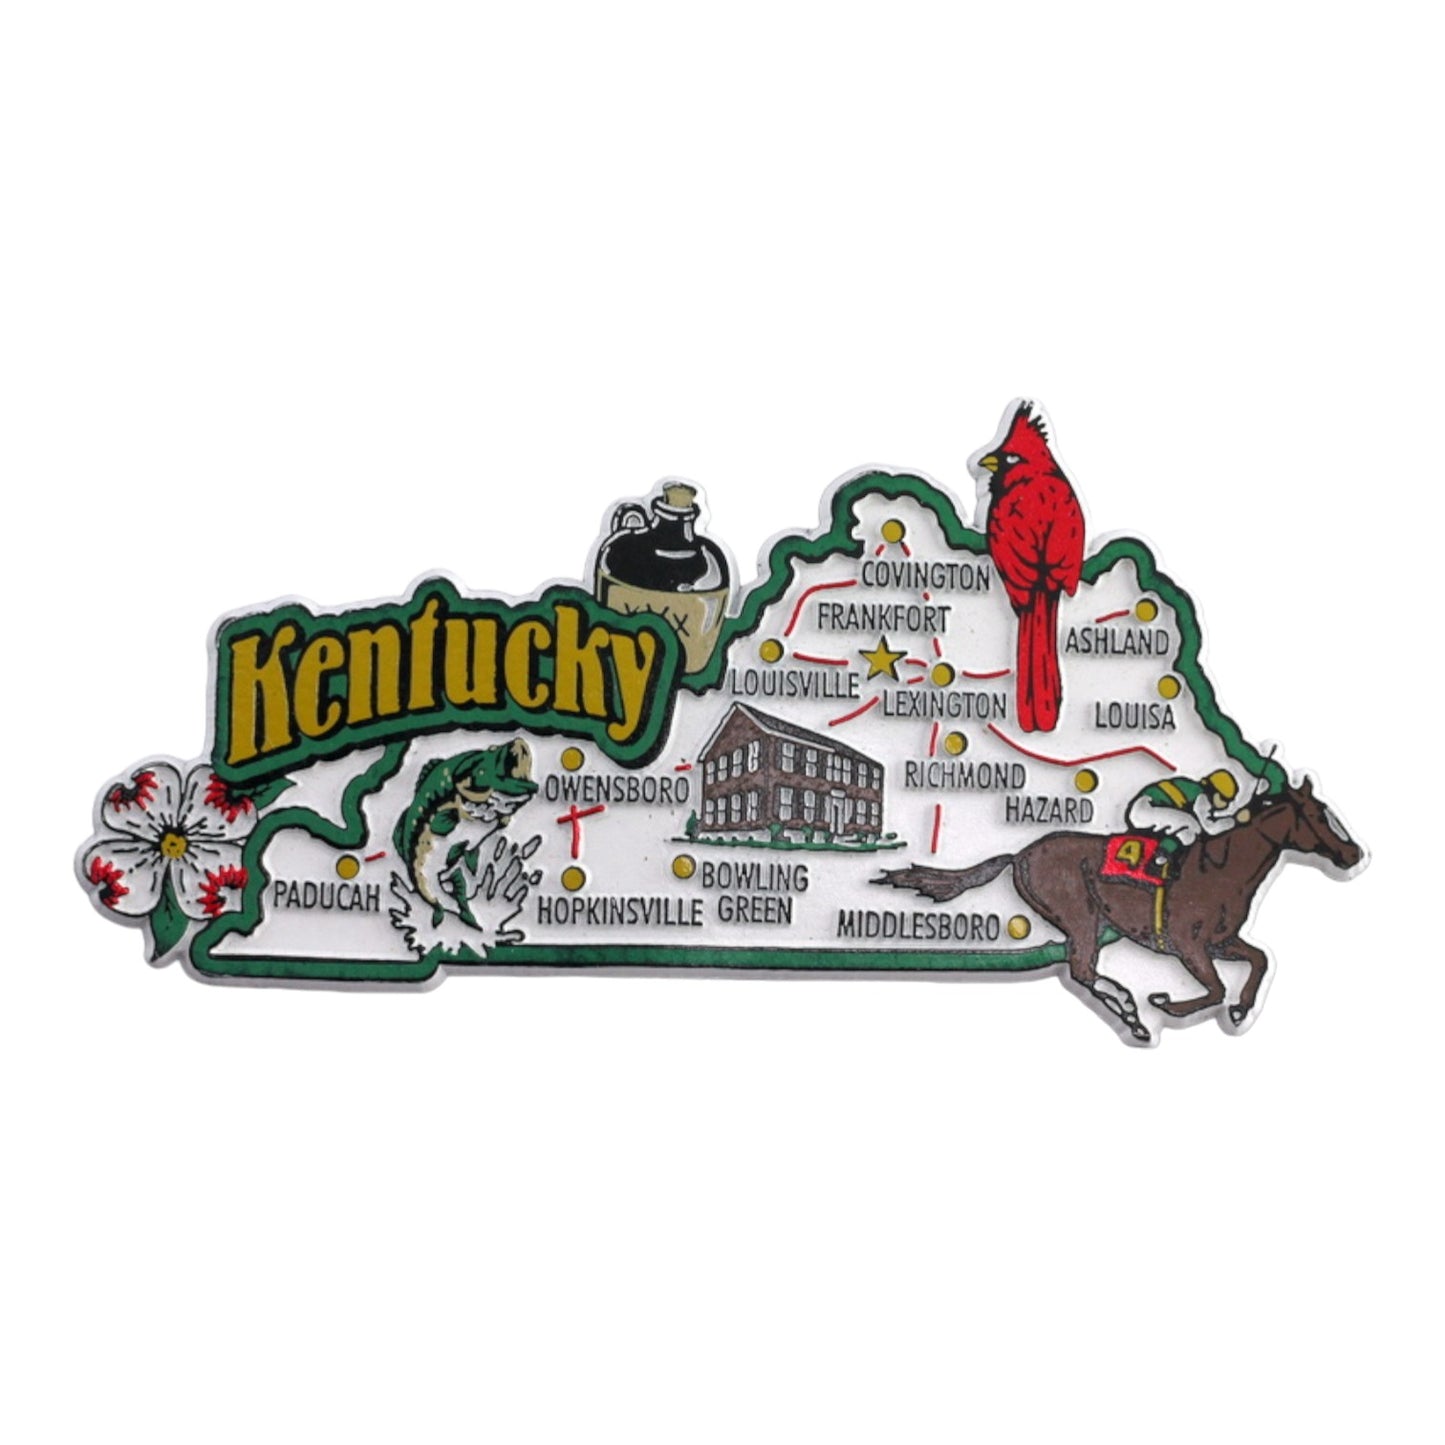 Kentucky State Map and Landmarks Collage Fridge Souvenir Collectible Magnet